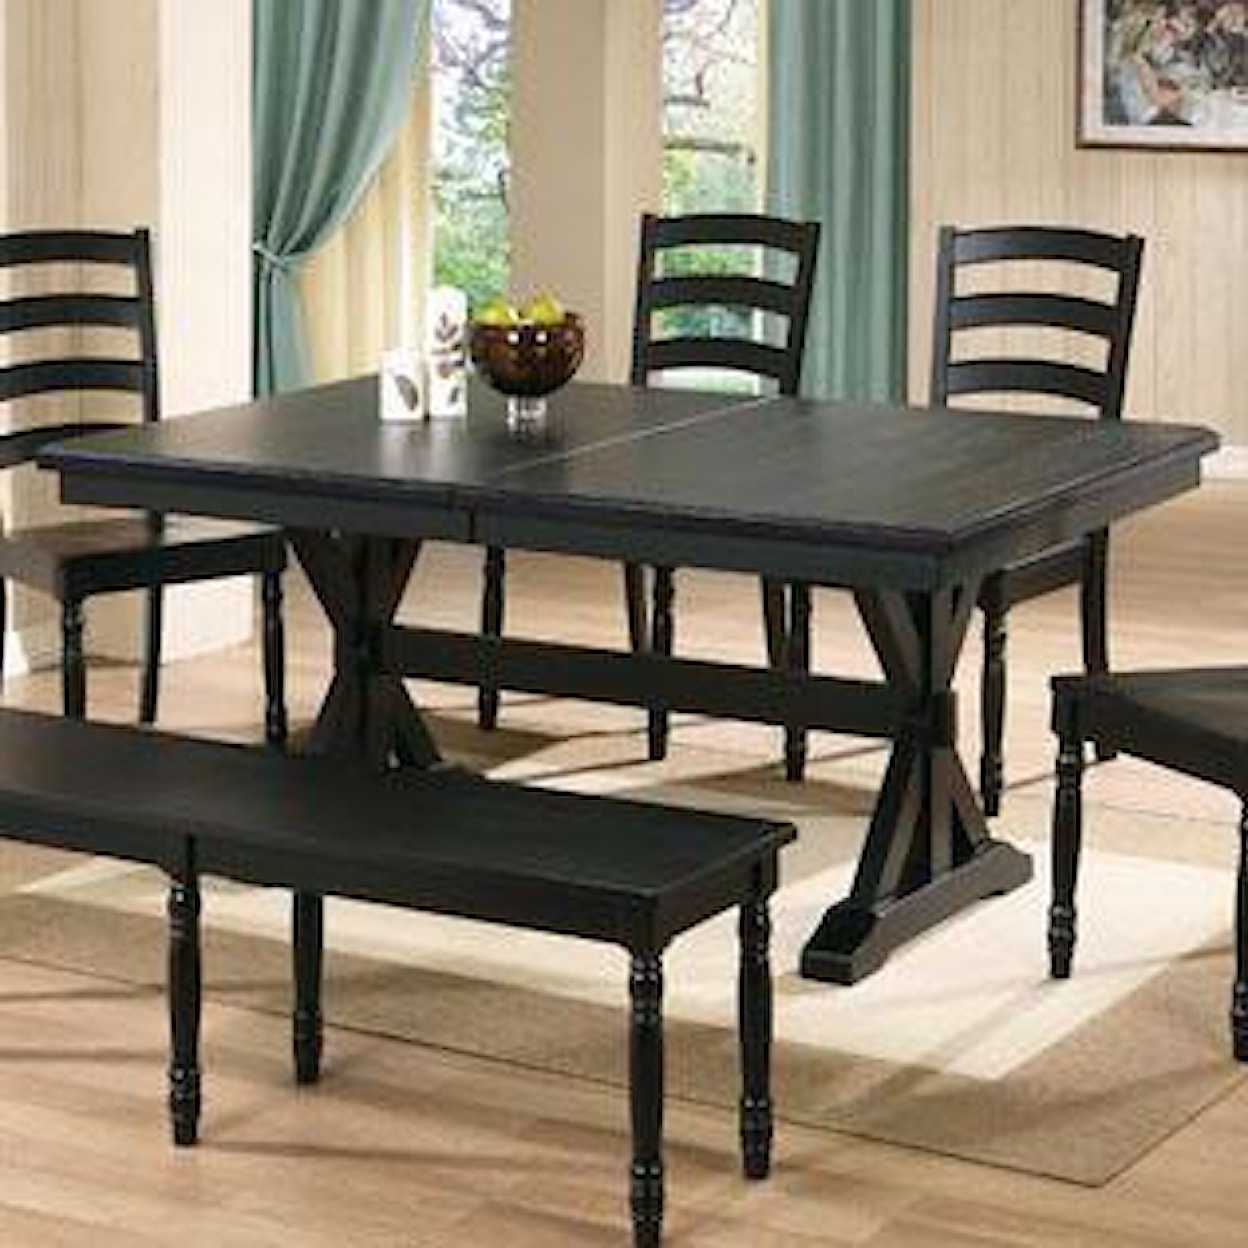 Winners Only Quails Run 6 Piece Dining Table, Chair and Bench Set